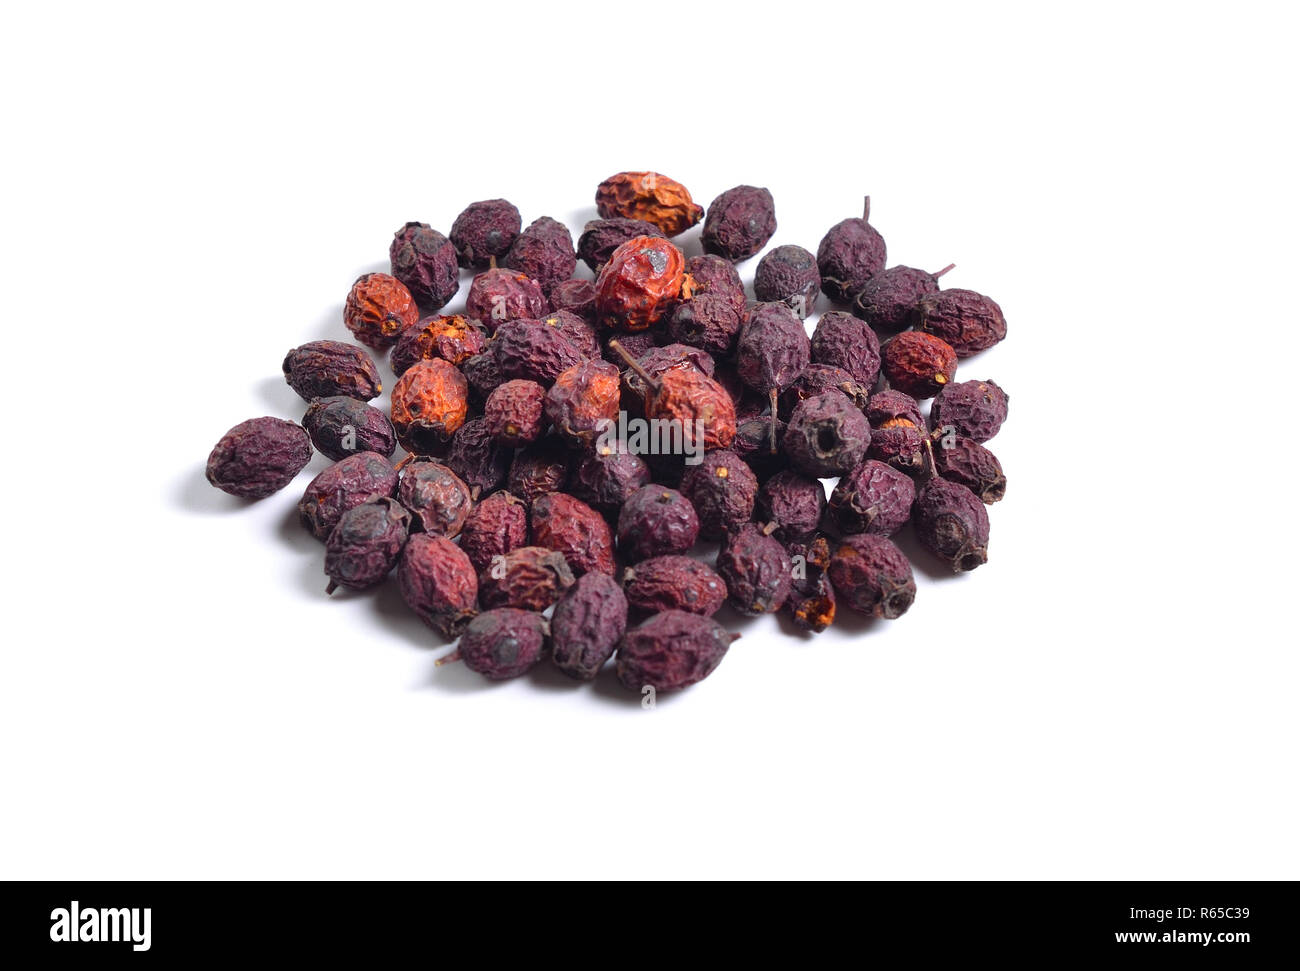 Dried medicinal herbs raw materials isolated on white. Fruit of Crataegus commonly called hawthorn, thornapple, May-tree, whitethorn, or hawberry Stock Photo